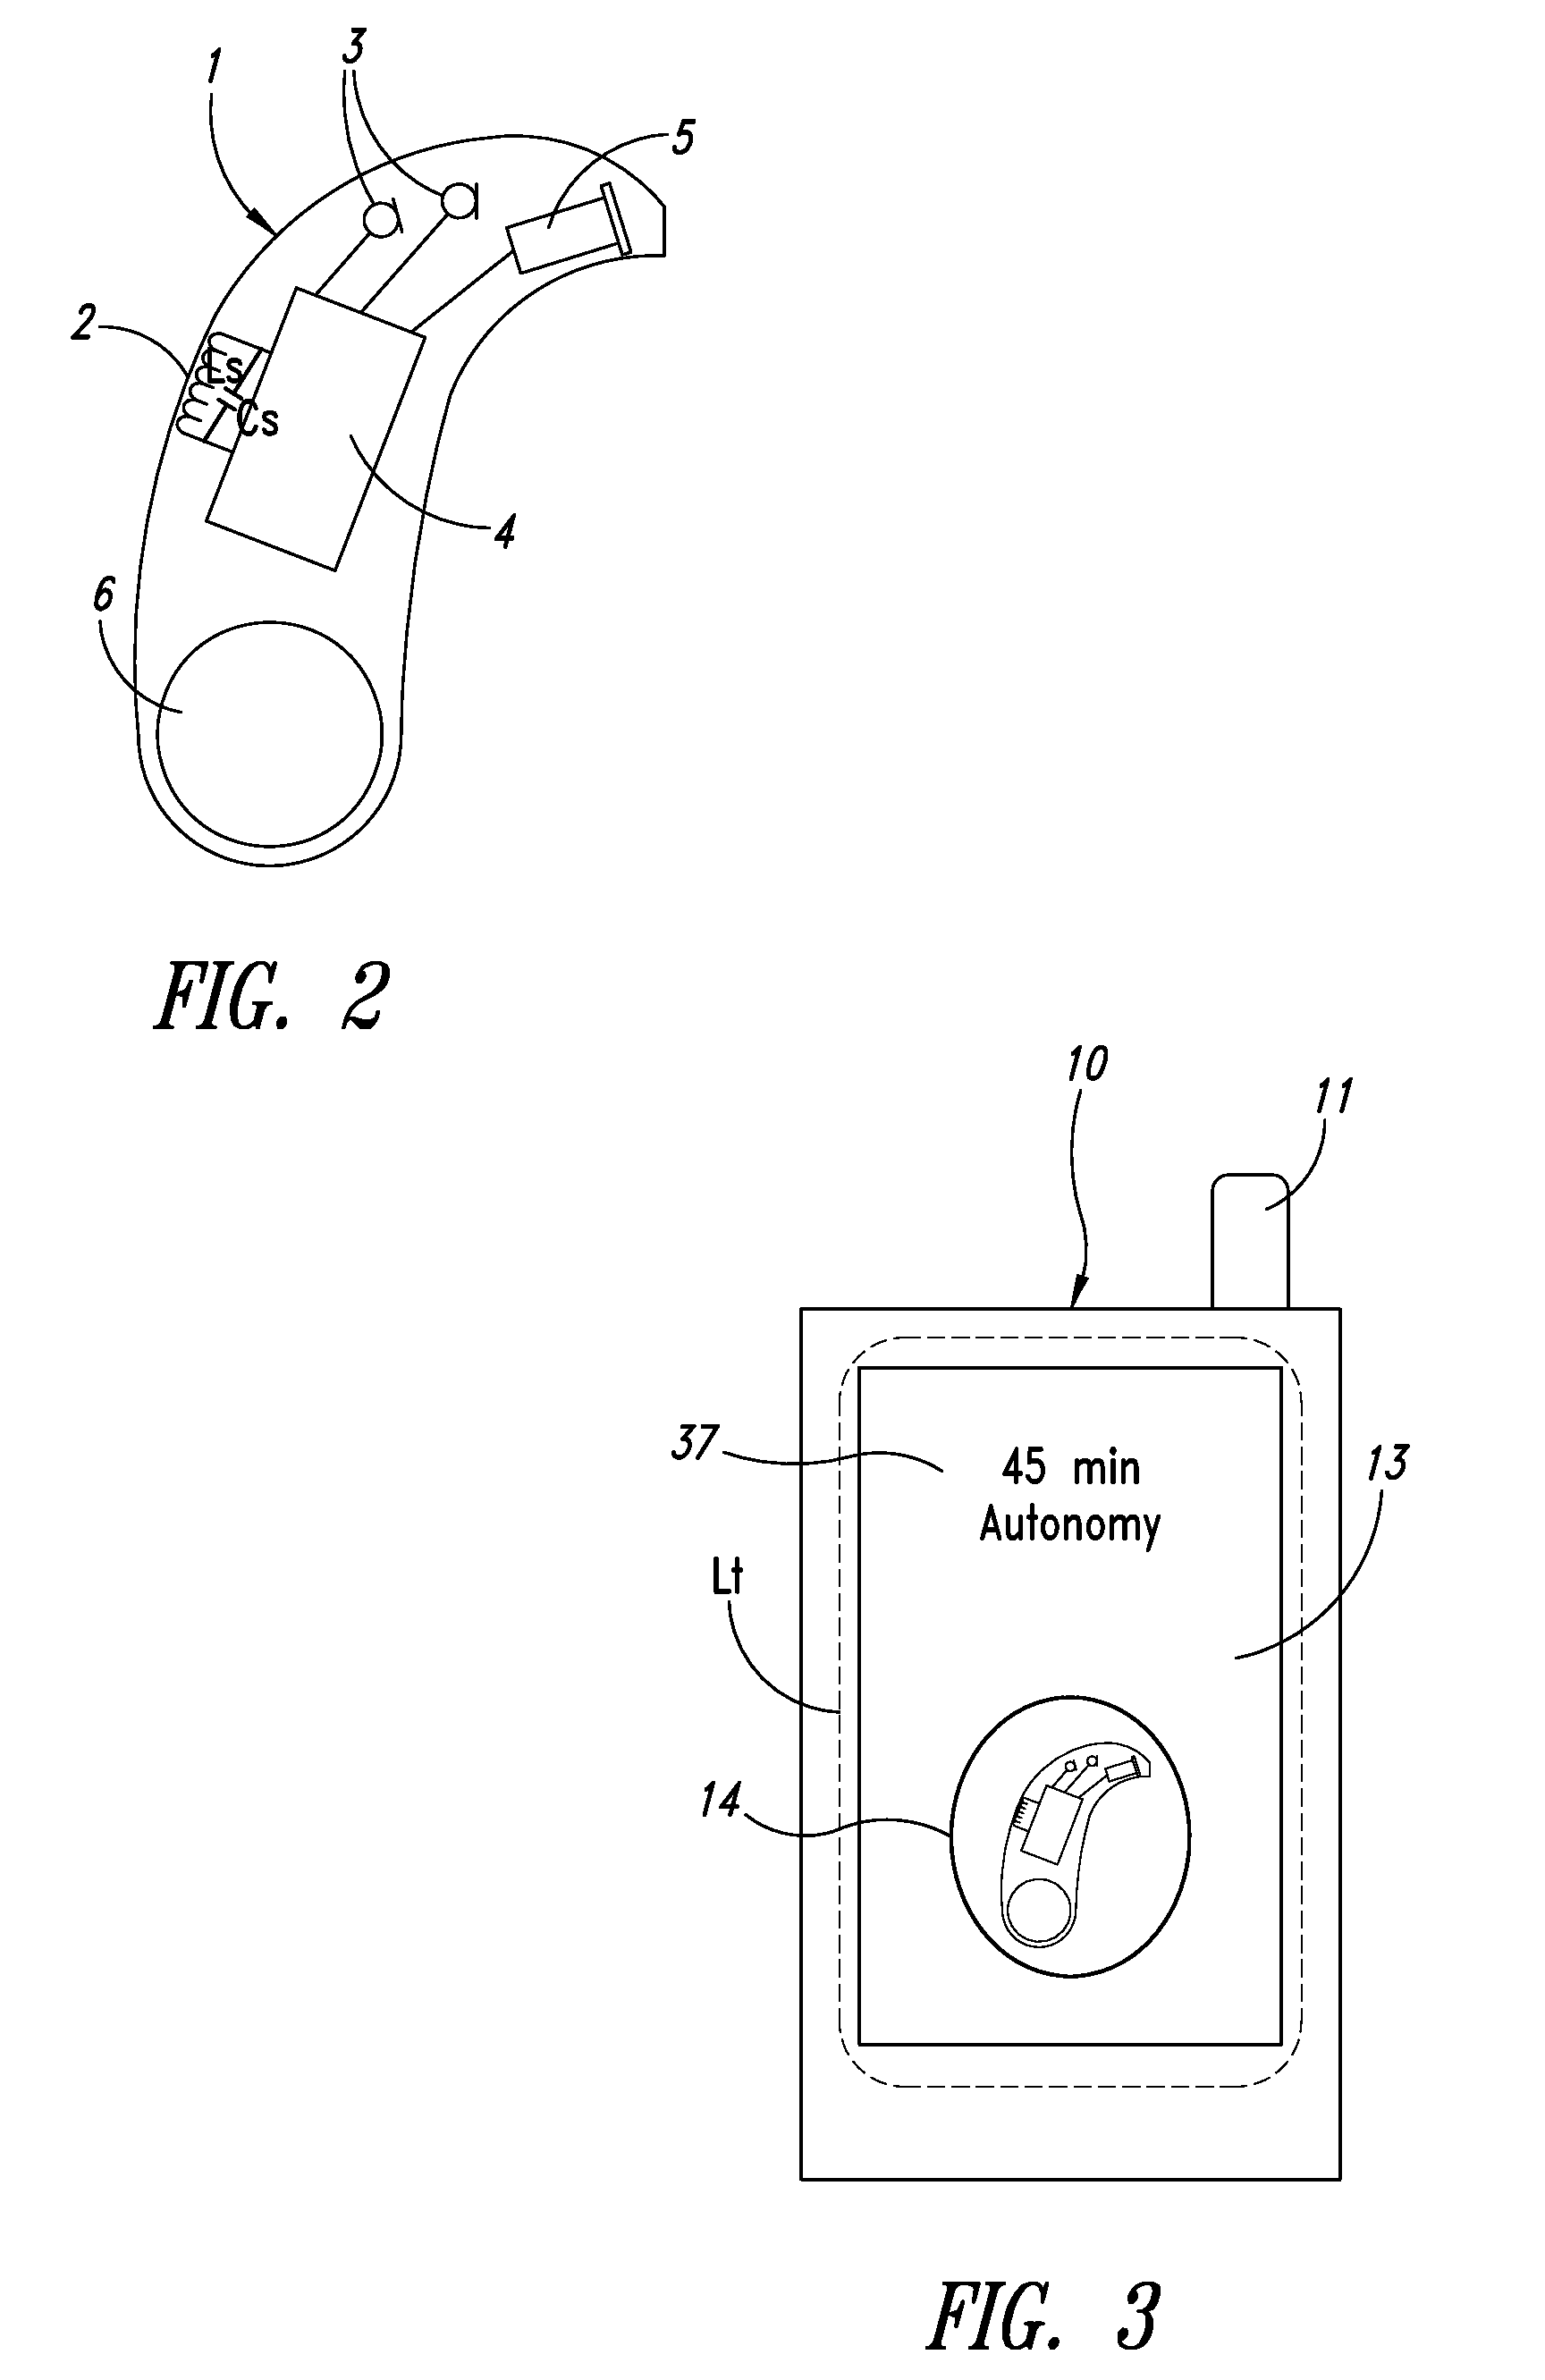 Contactless recharging of the battery of a portable object by a telephone